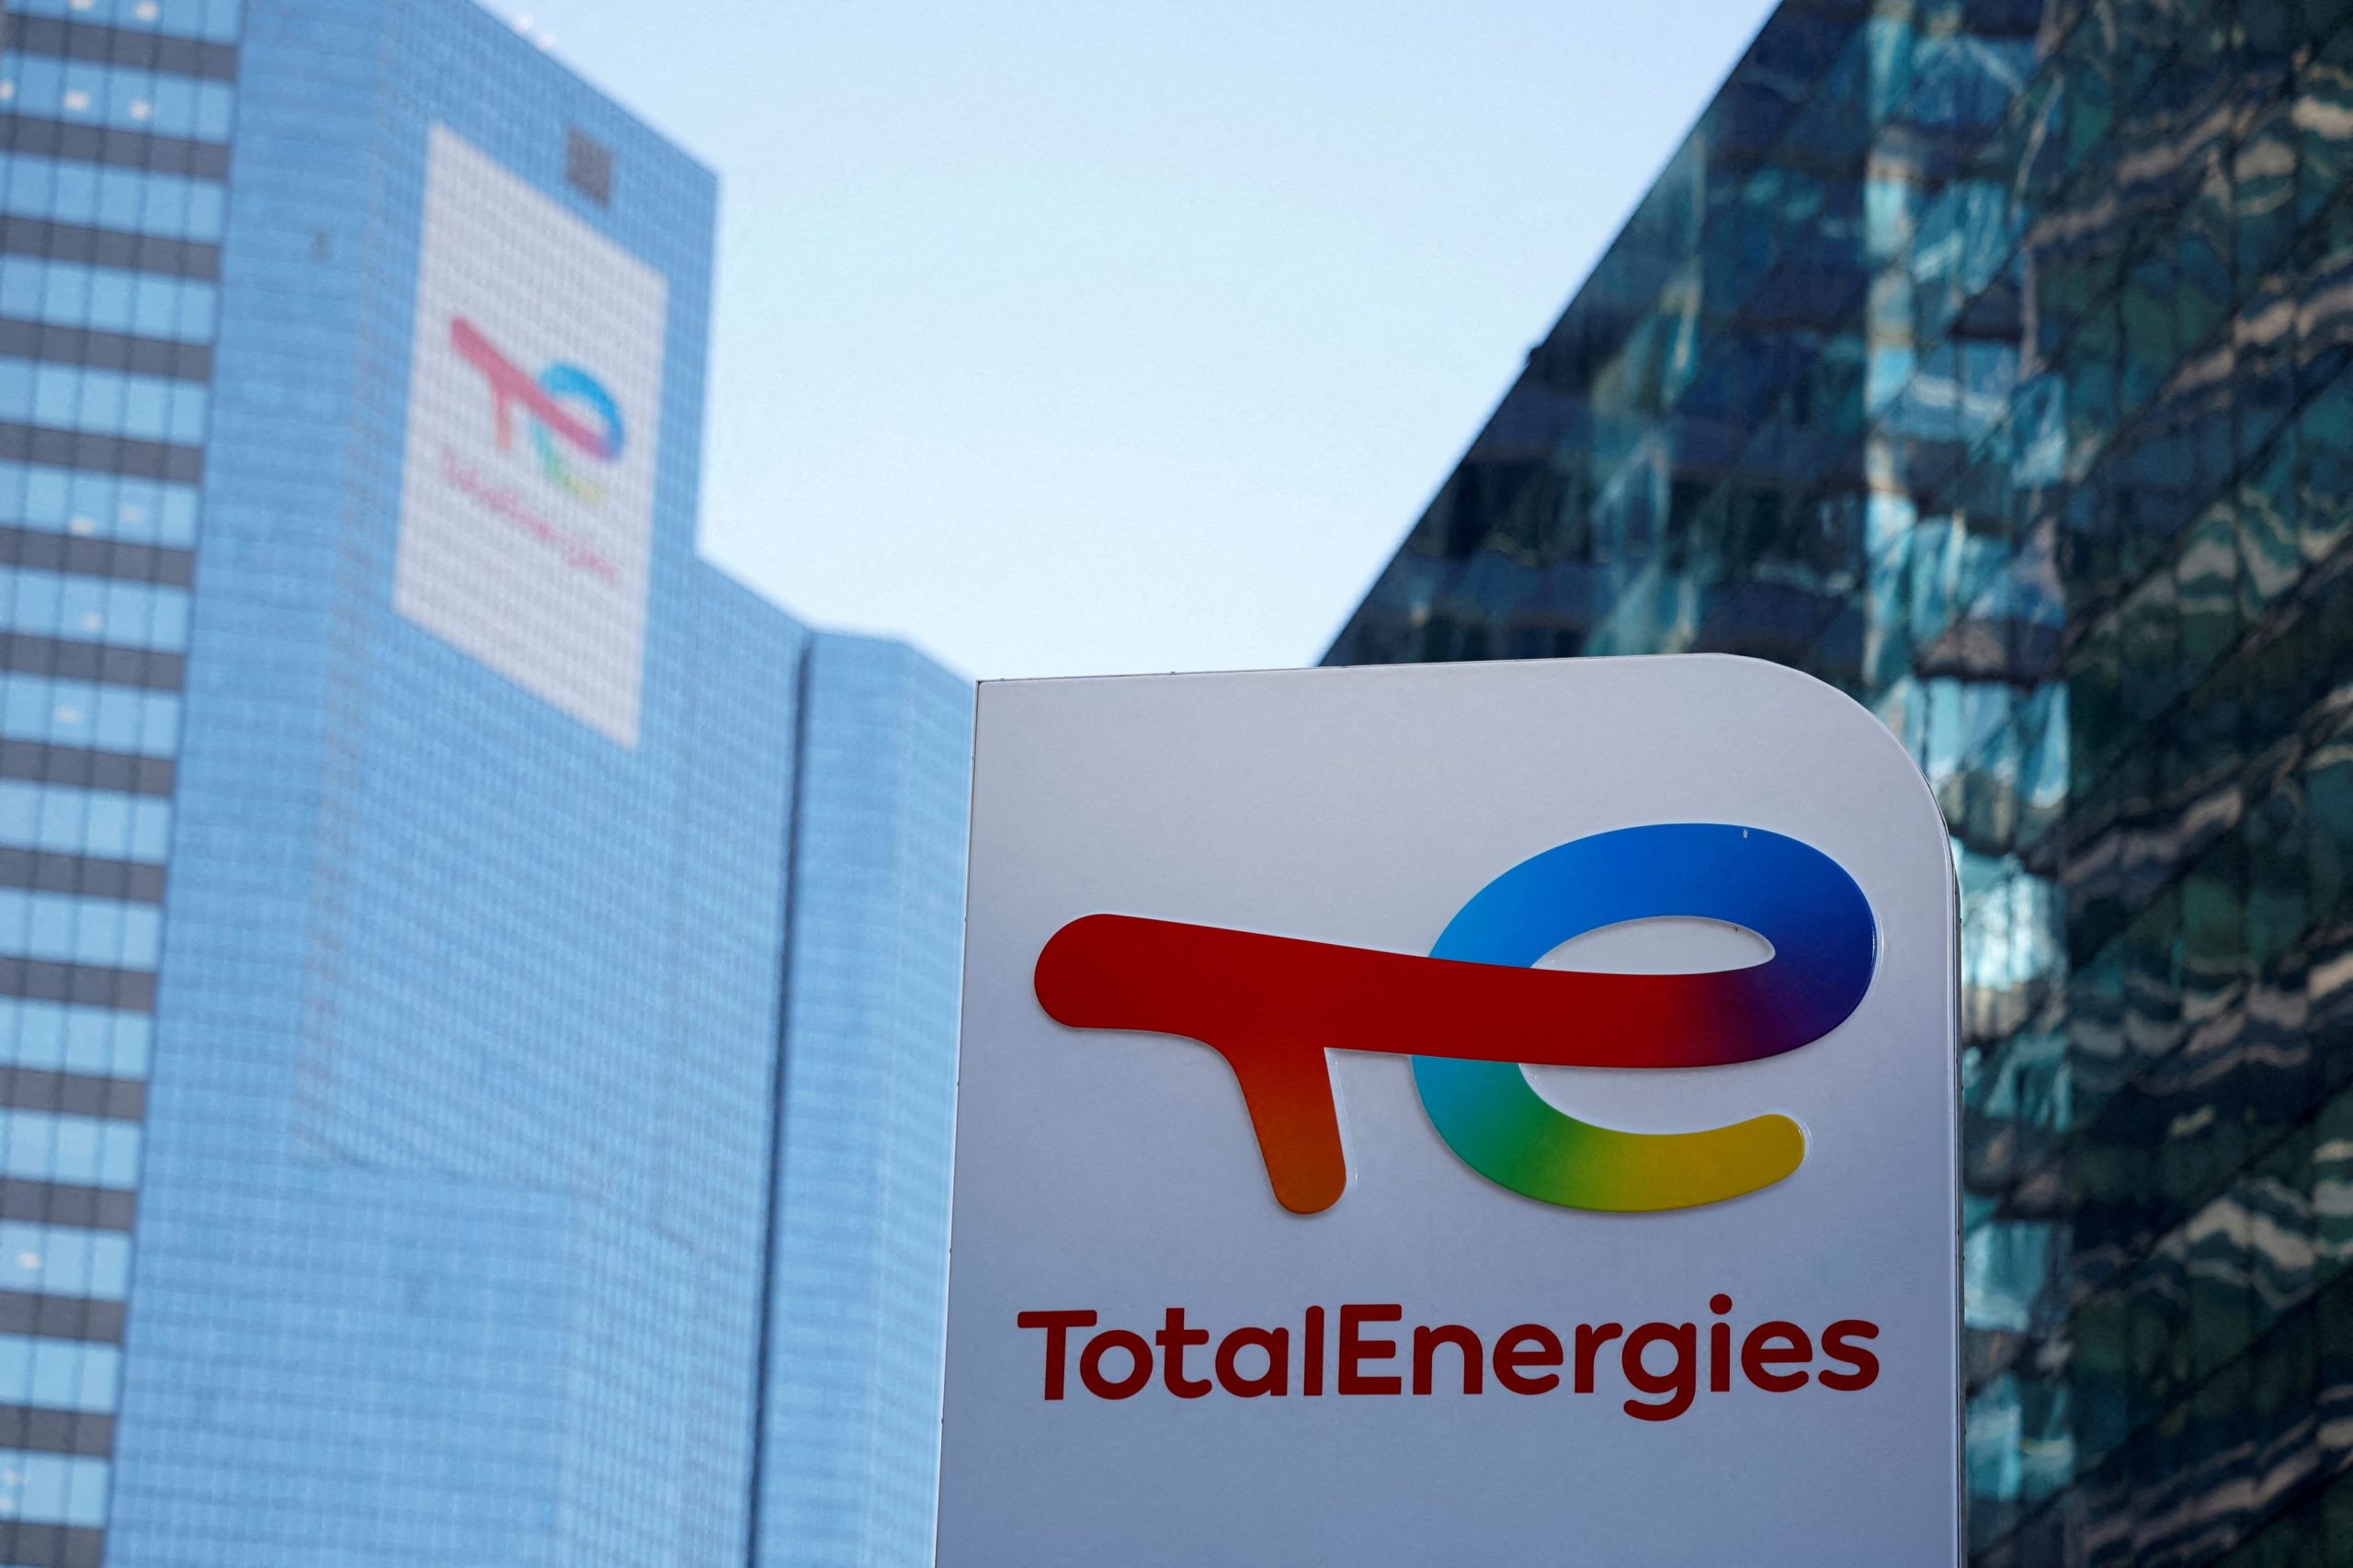 TotalEnergies To Sell 50% of RES Portfolio in France, USA, Greece, Spain & Portugal